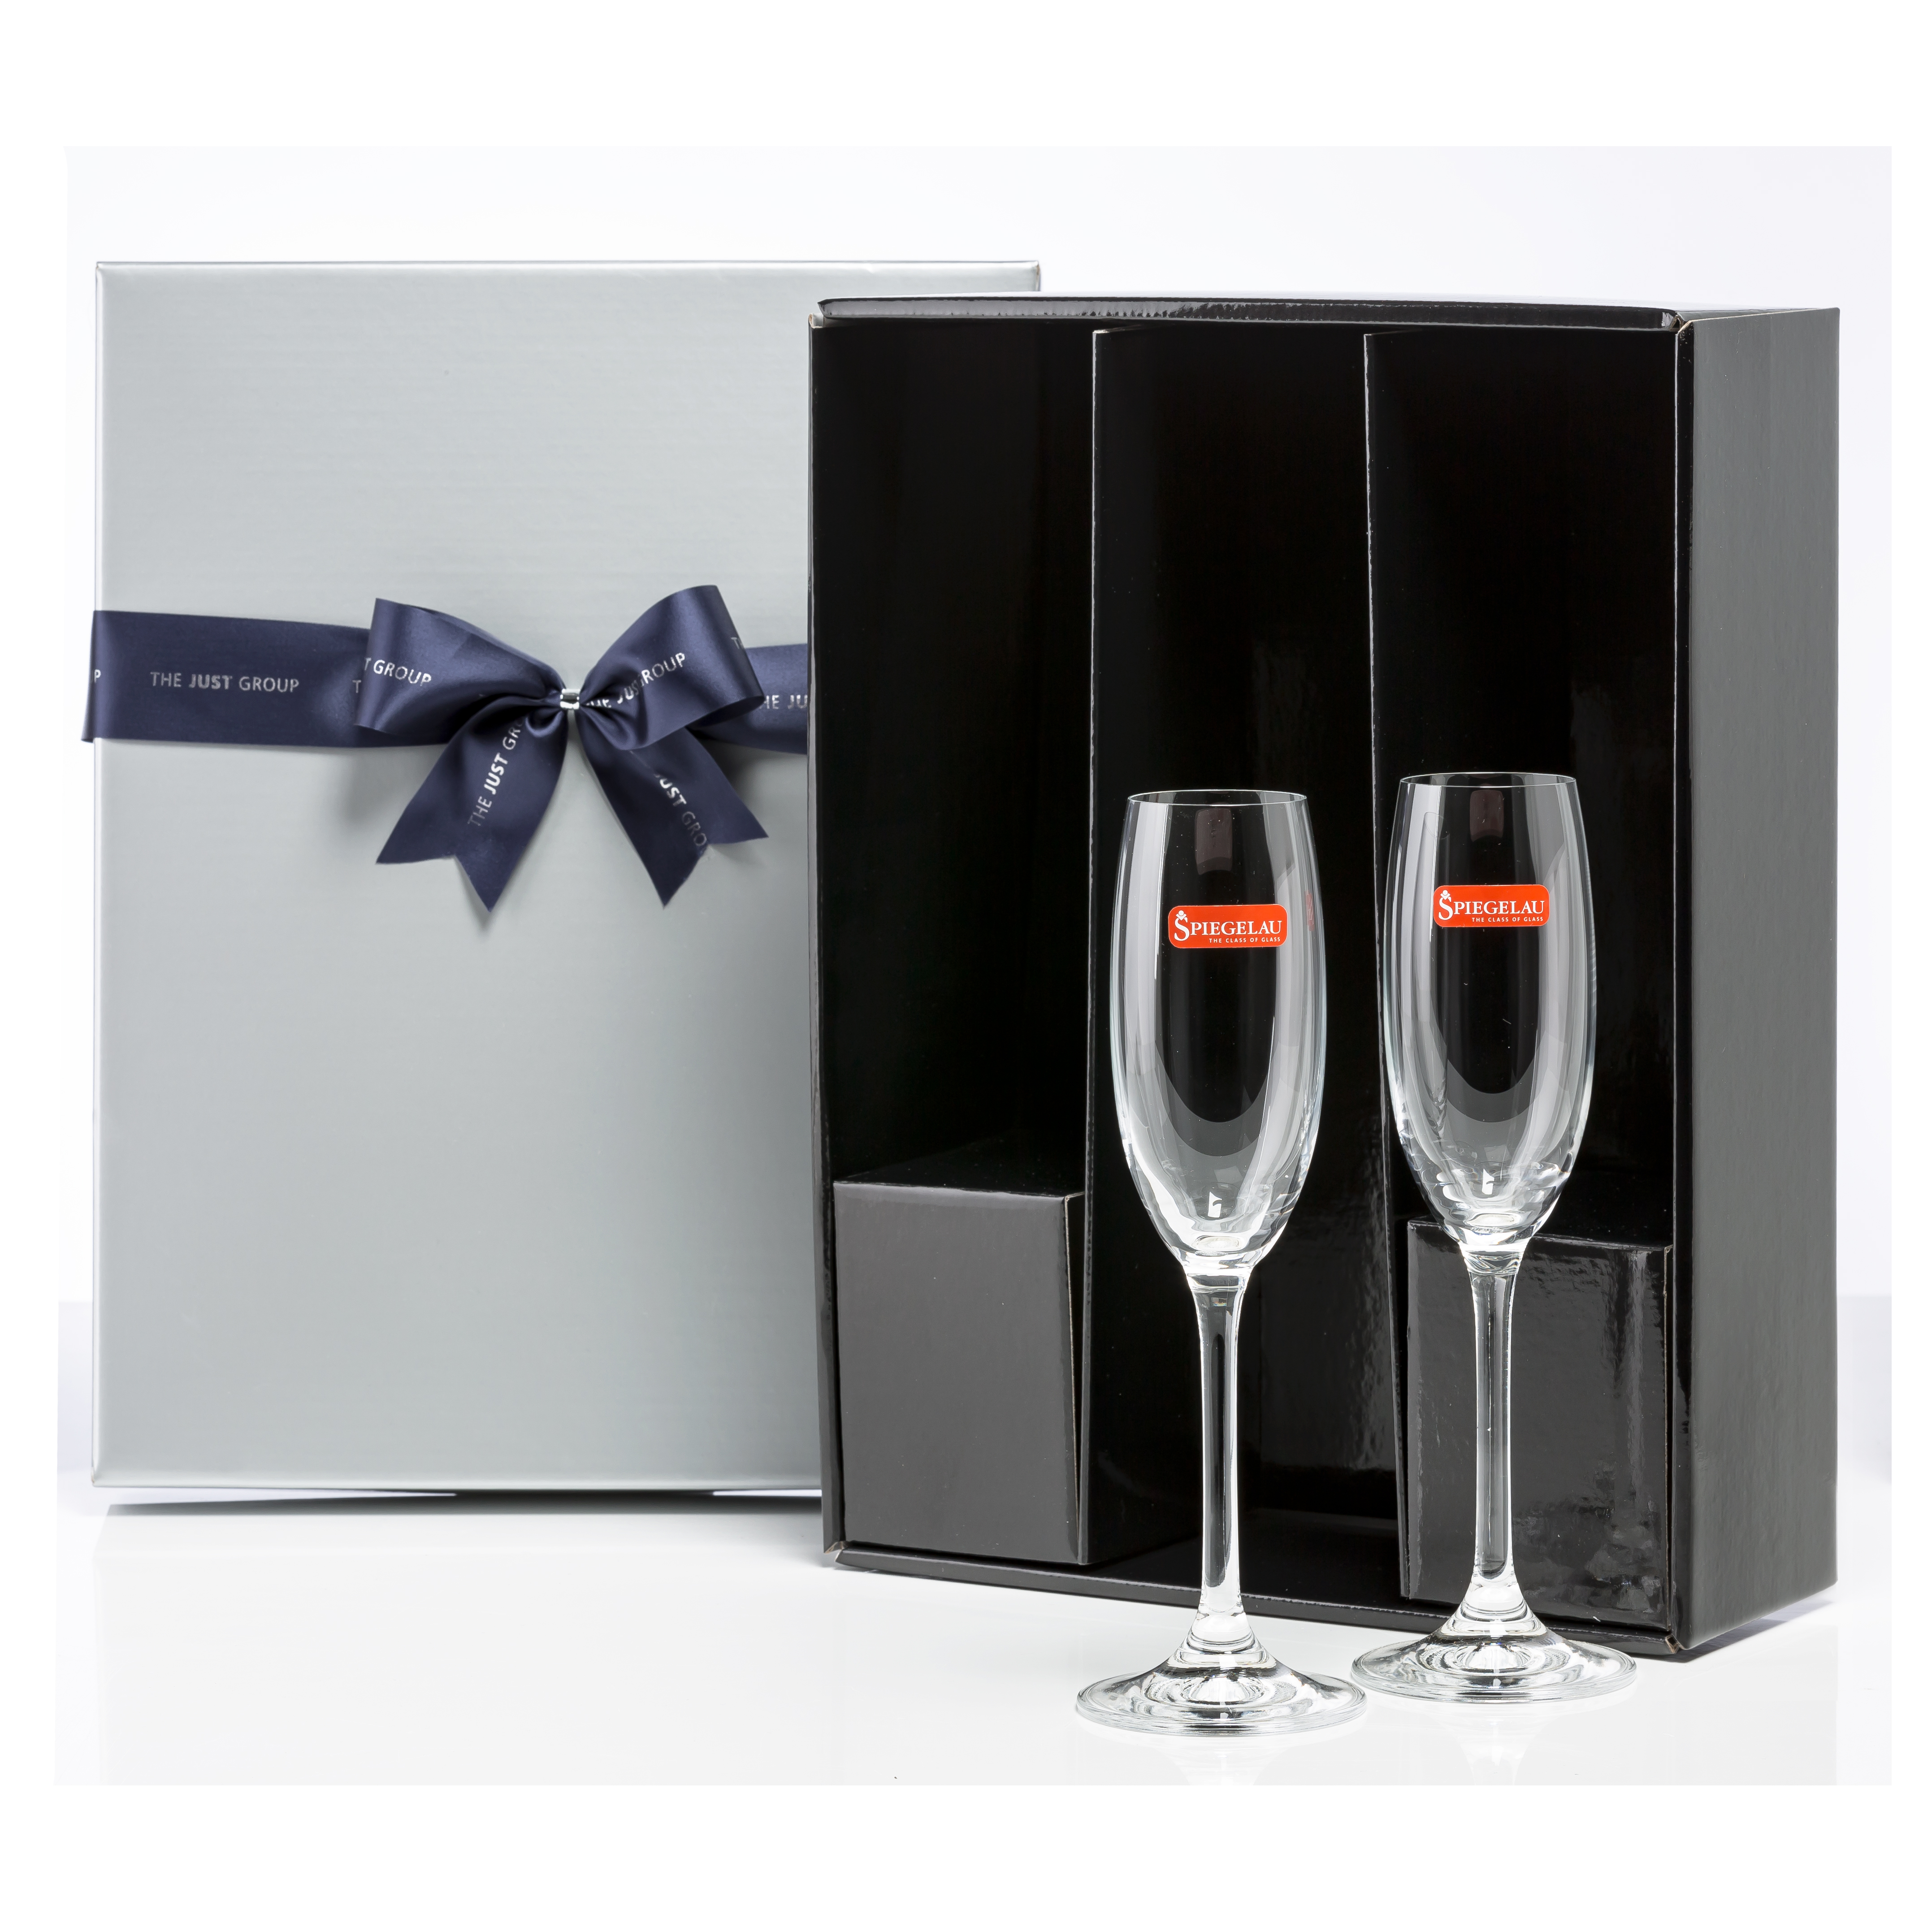 Silver Sparkling Presentation Box with 2 Flutes - The Just Group Ribbon